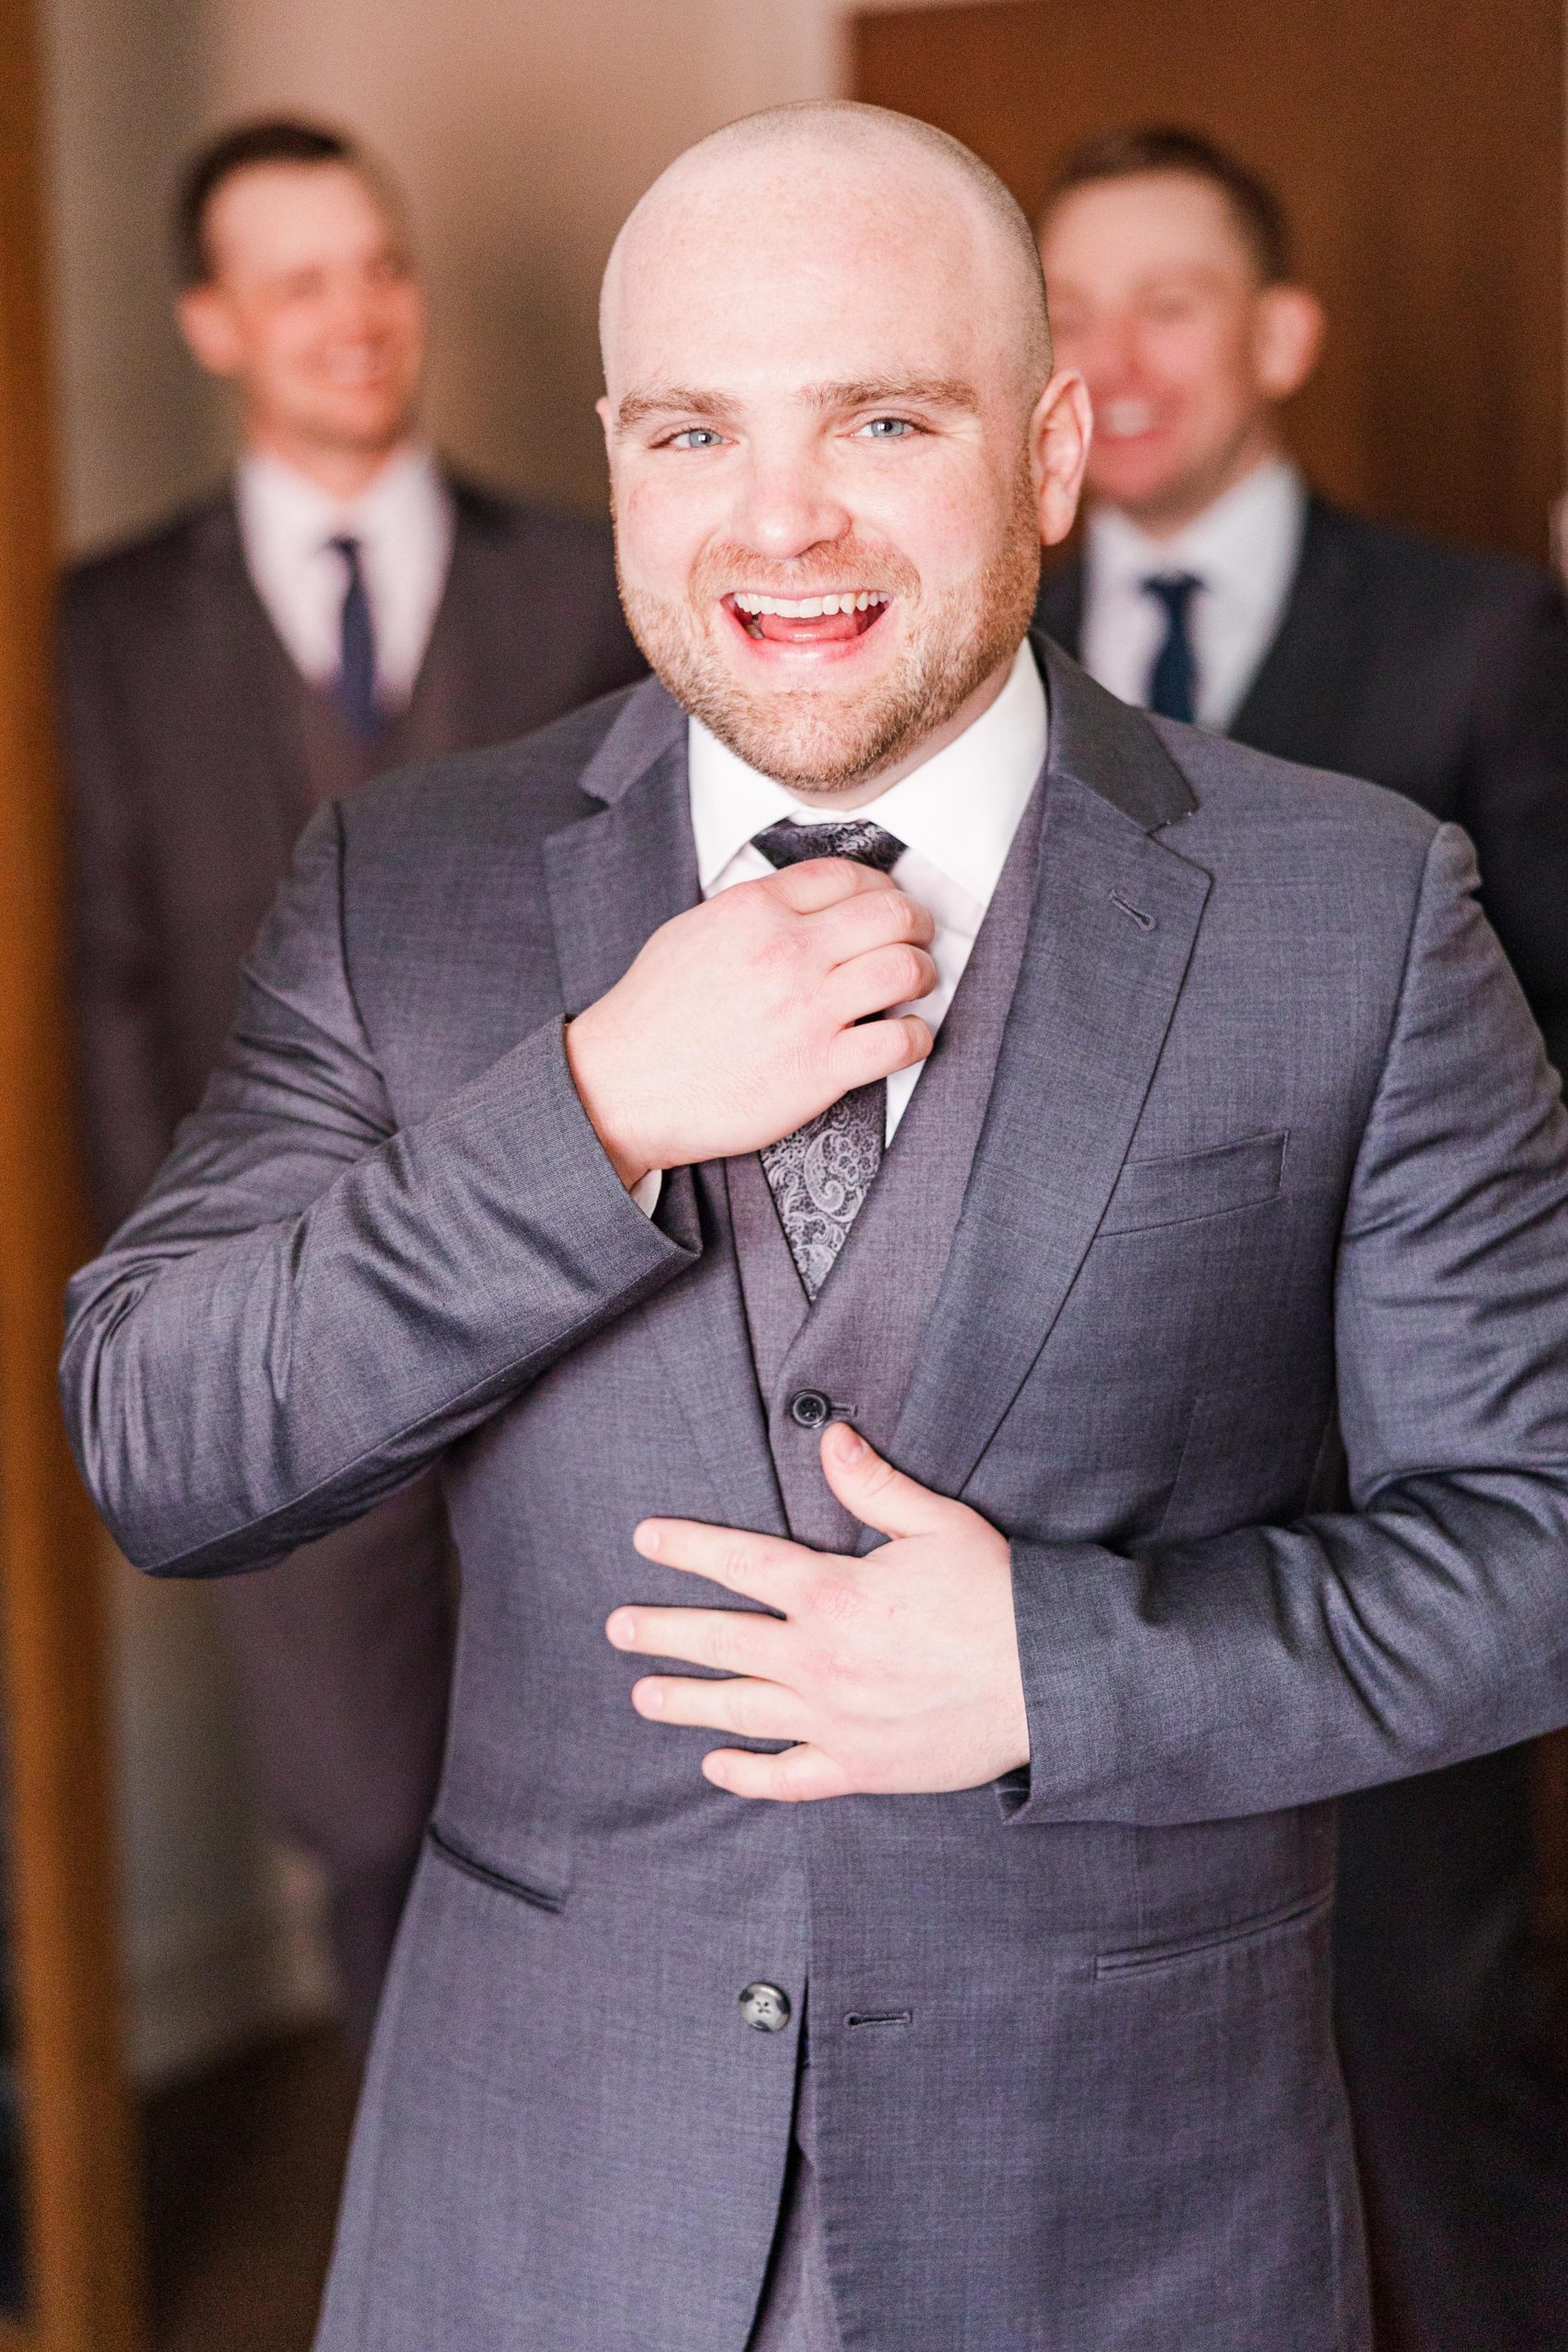 Groom gets ready for her wedding day in Naperville, Illinois, Photo Taken by Austin Wedding Photographers, Joanna & Brett Photography